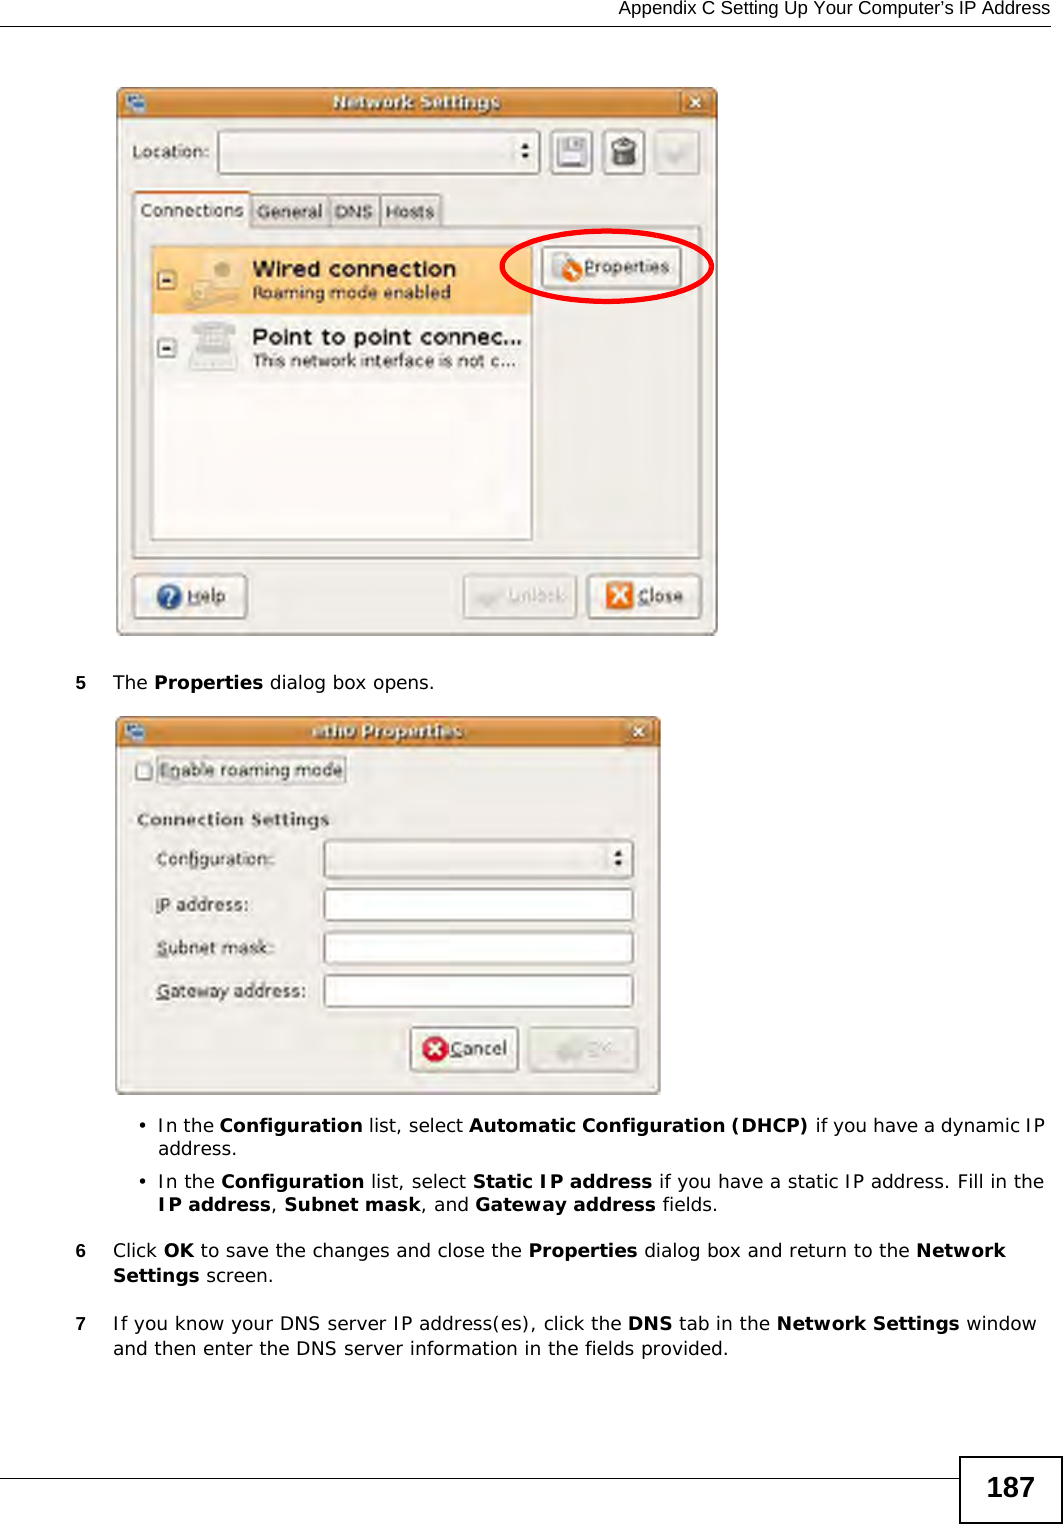  Appendix C Setting Up Your Computer’s IP Address1875The Properties dialog box opens.•In the Configuration list, select Automatic Configuration (DHCP) if you have a dynamic IP address.•In the Configuration list, select Static IP address if you have a static IP address. Fill in the IP address, Subnet mask, and Gateway address fields. 6Click OK to save the changes and close the Properties dialog box and return to the Network Settings screen. 7If you know your DNS server IP address(es), click the DNS tab in the Network Settings window and then enter the DNS server information in the fields provided. 